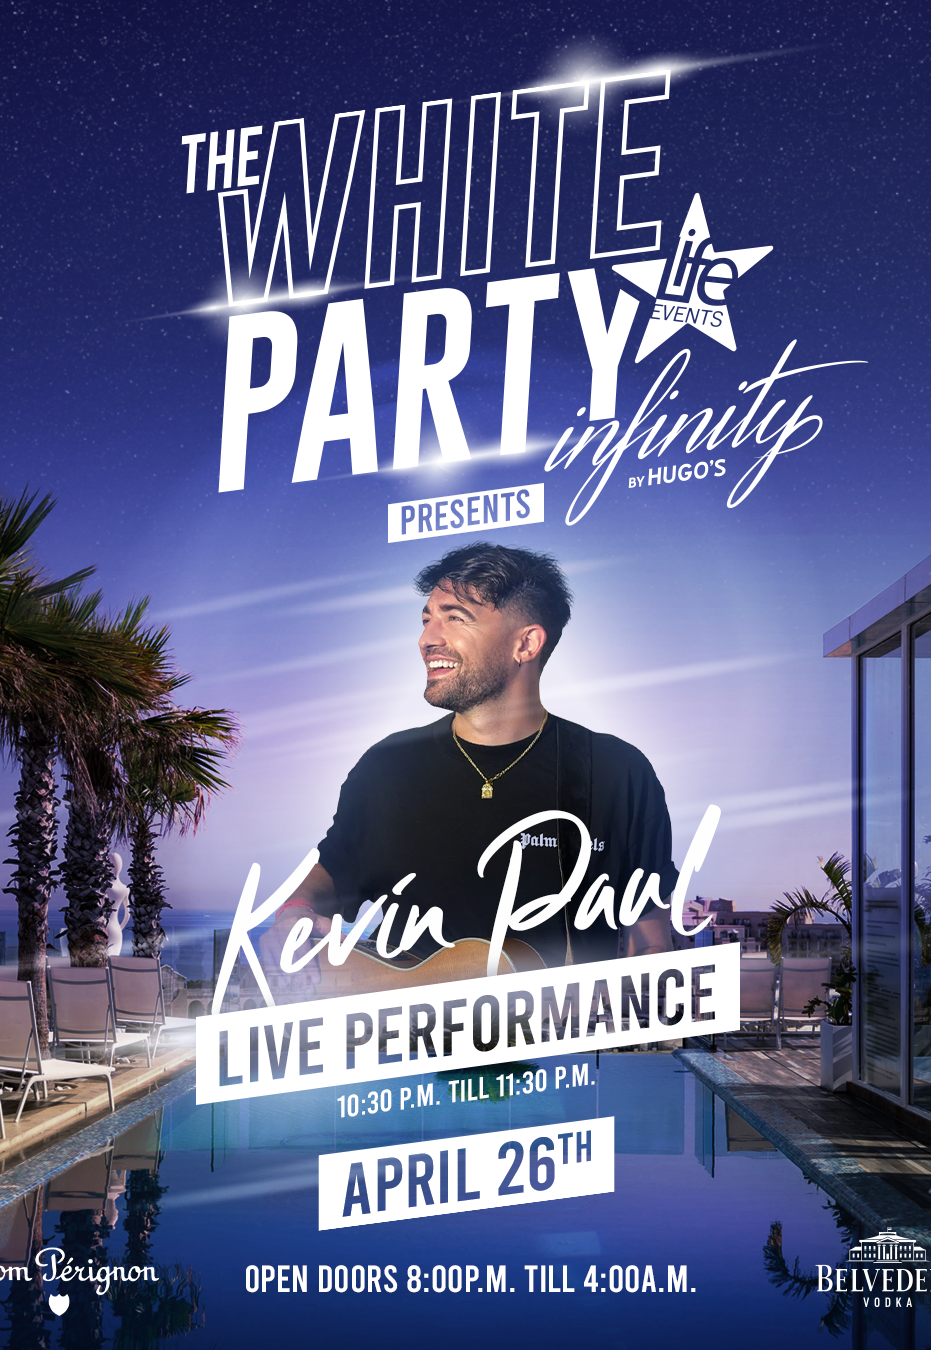 THE WHITE PARTY PRESENTS KEVIN PAUL poster